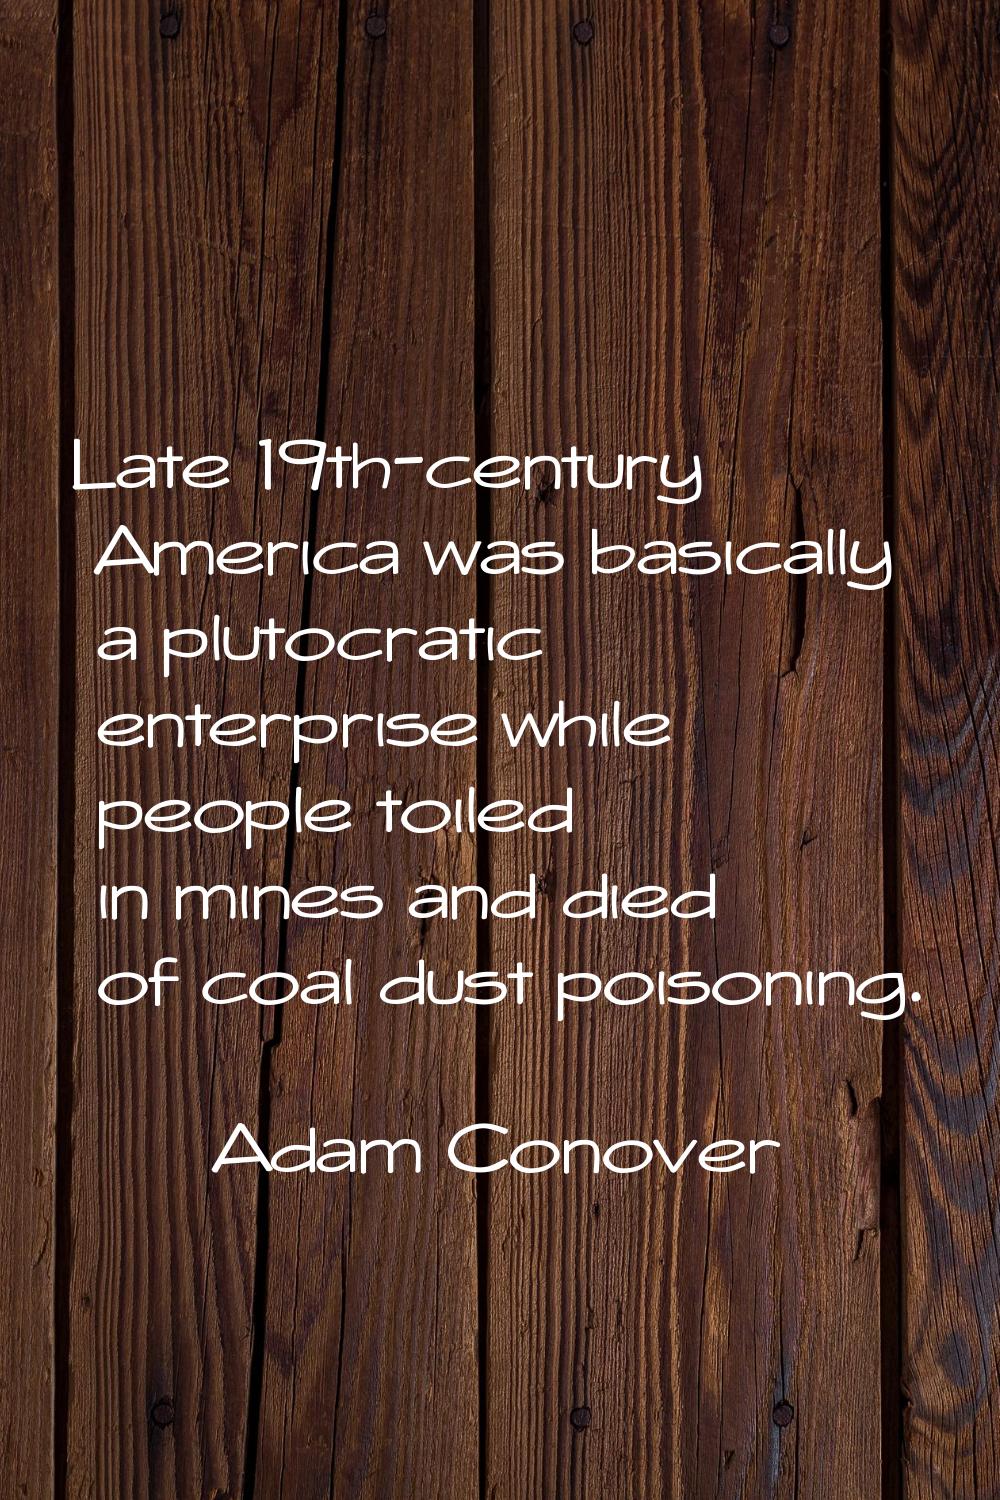 Late 19th-century America was basically a plutocratic enterprise while people toiled in mines and d